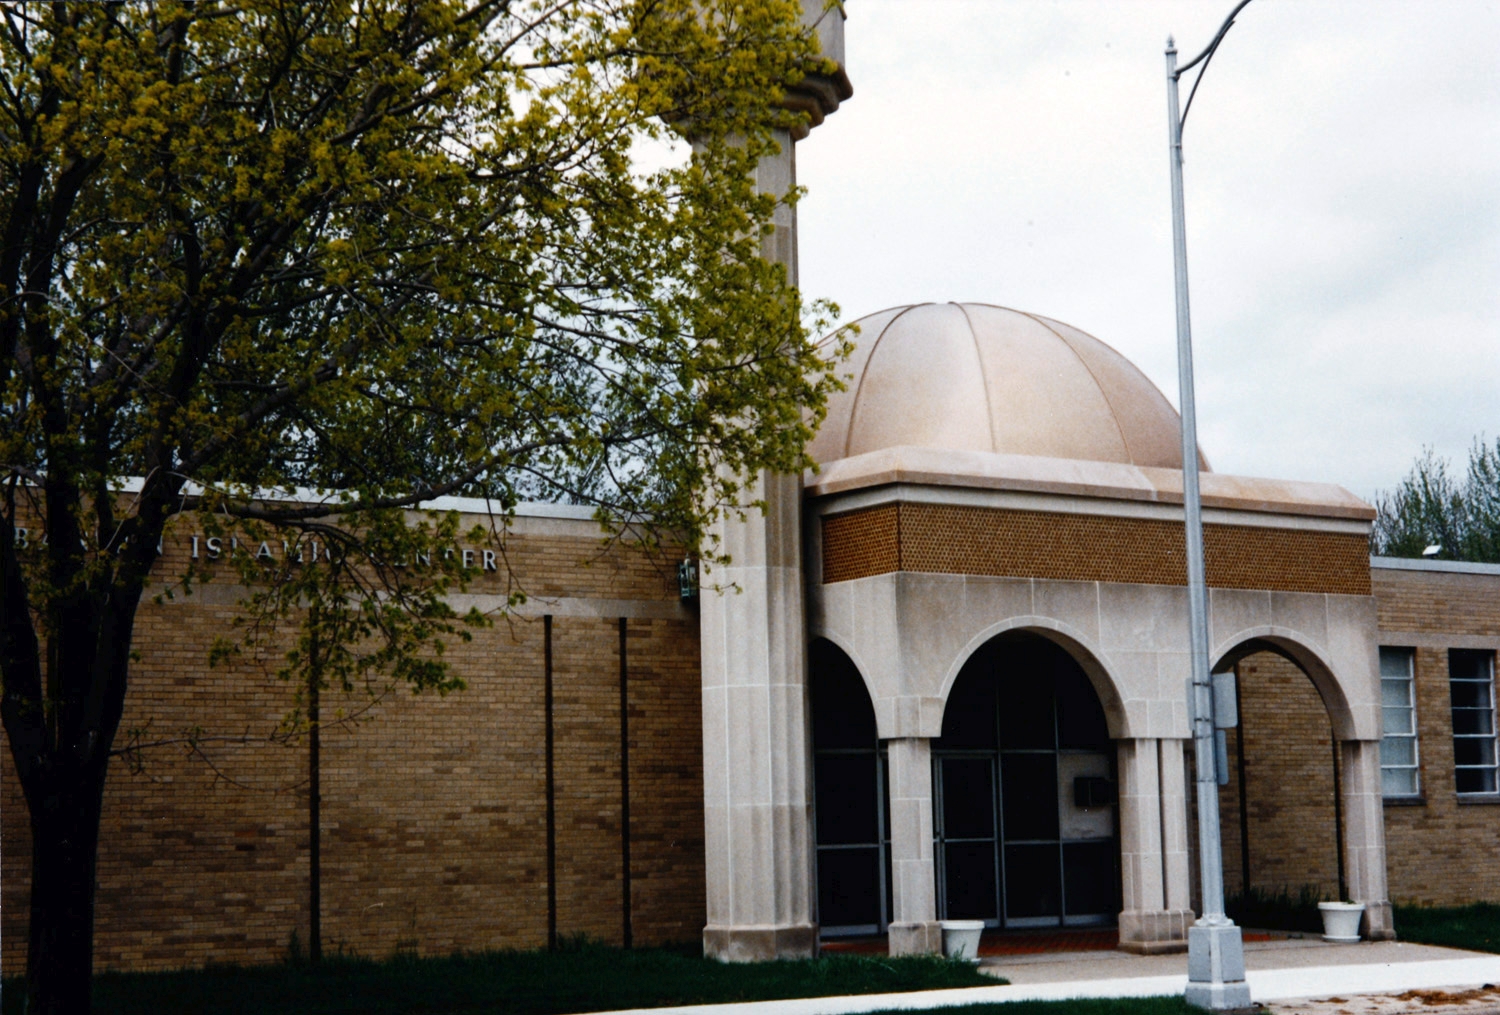 Albanian Islamic Center - Entrance portico with dome and base of minaret